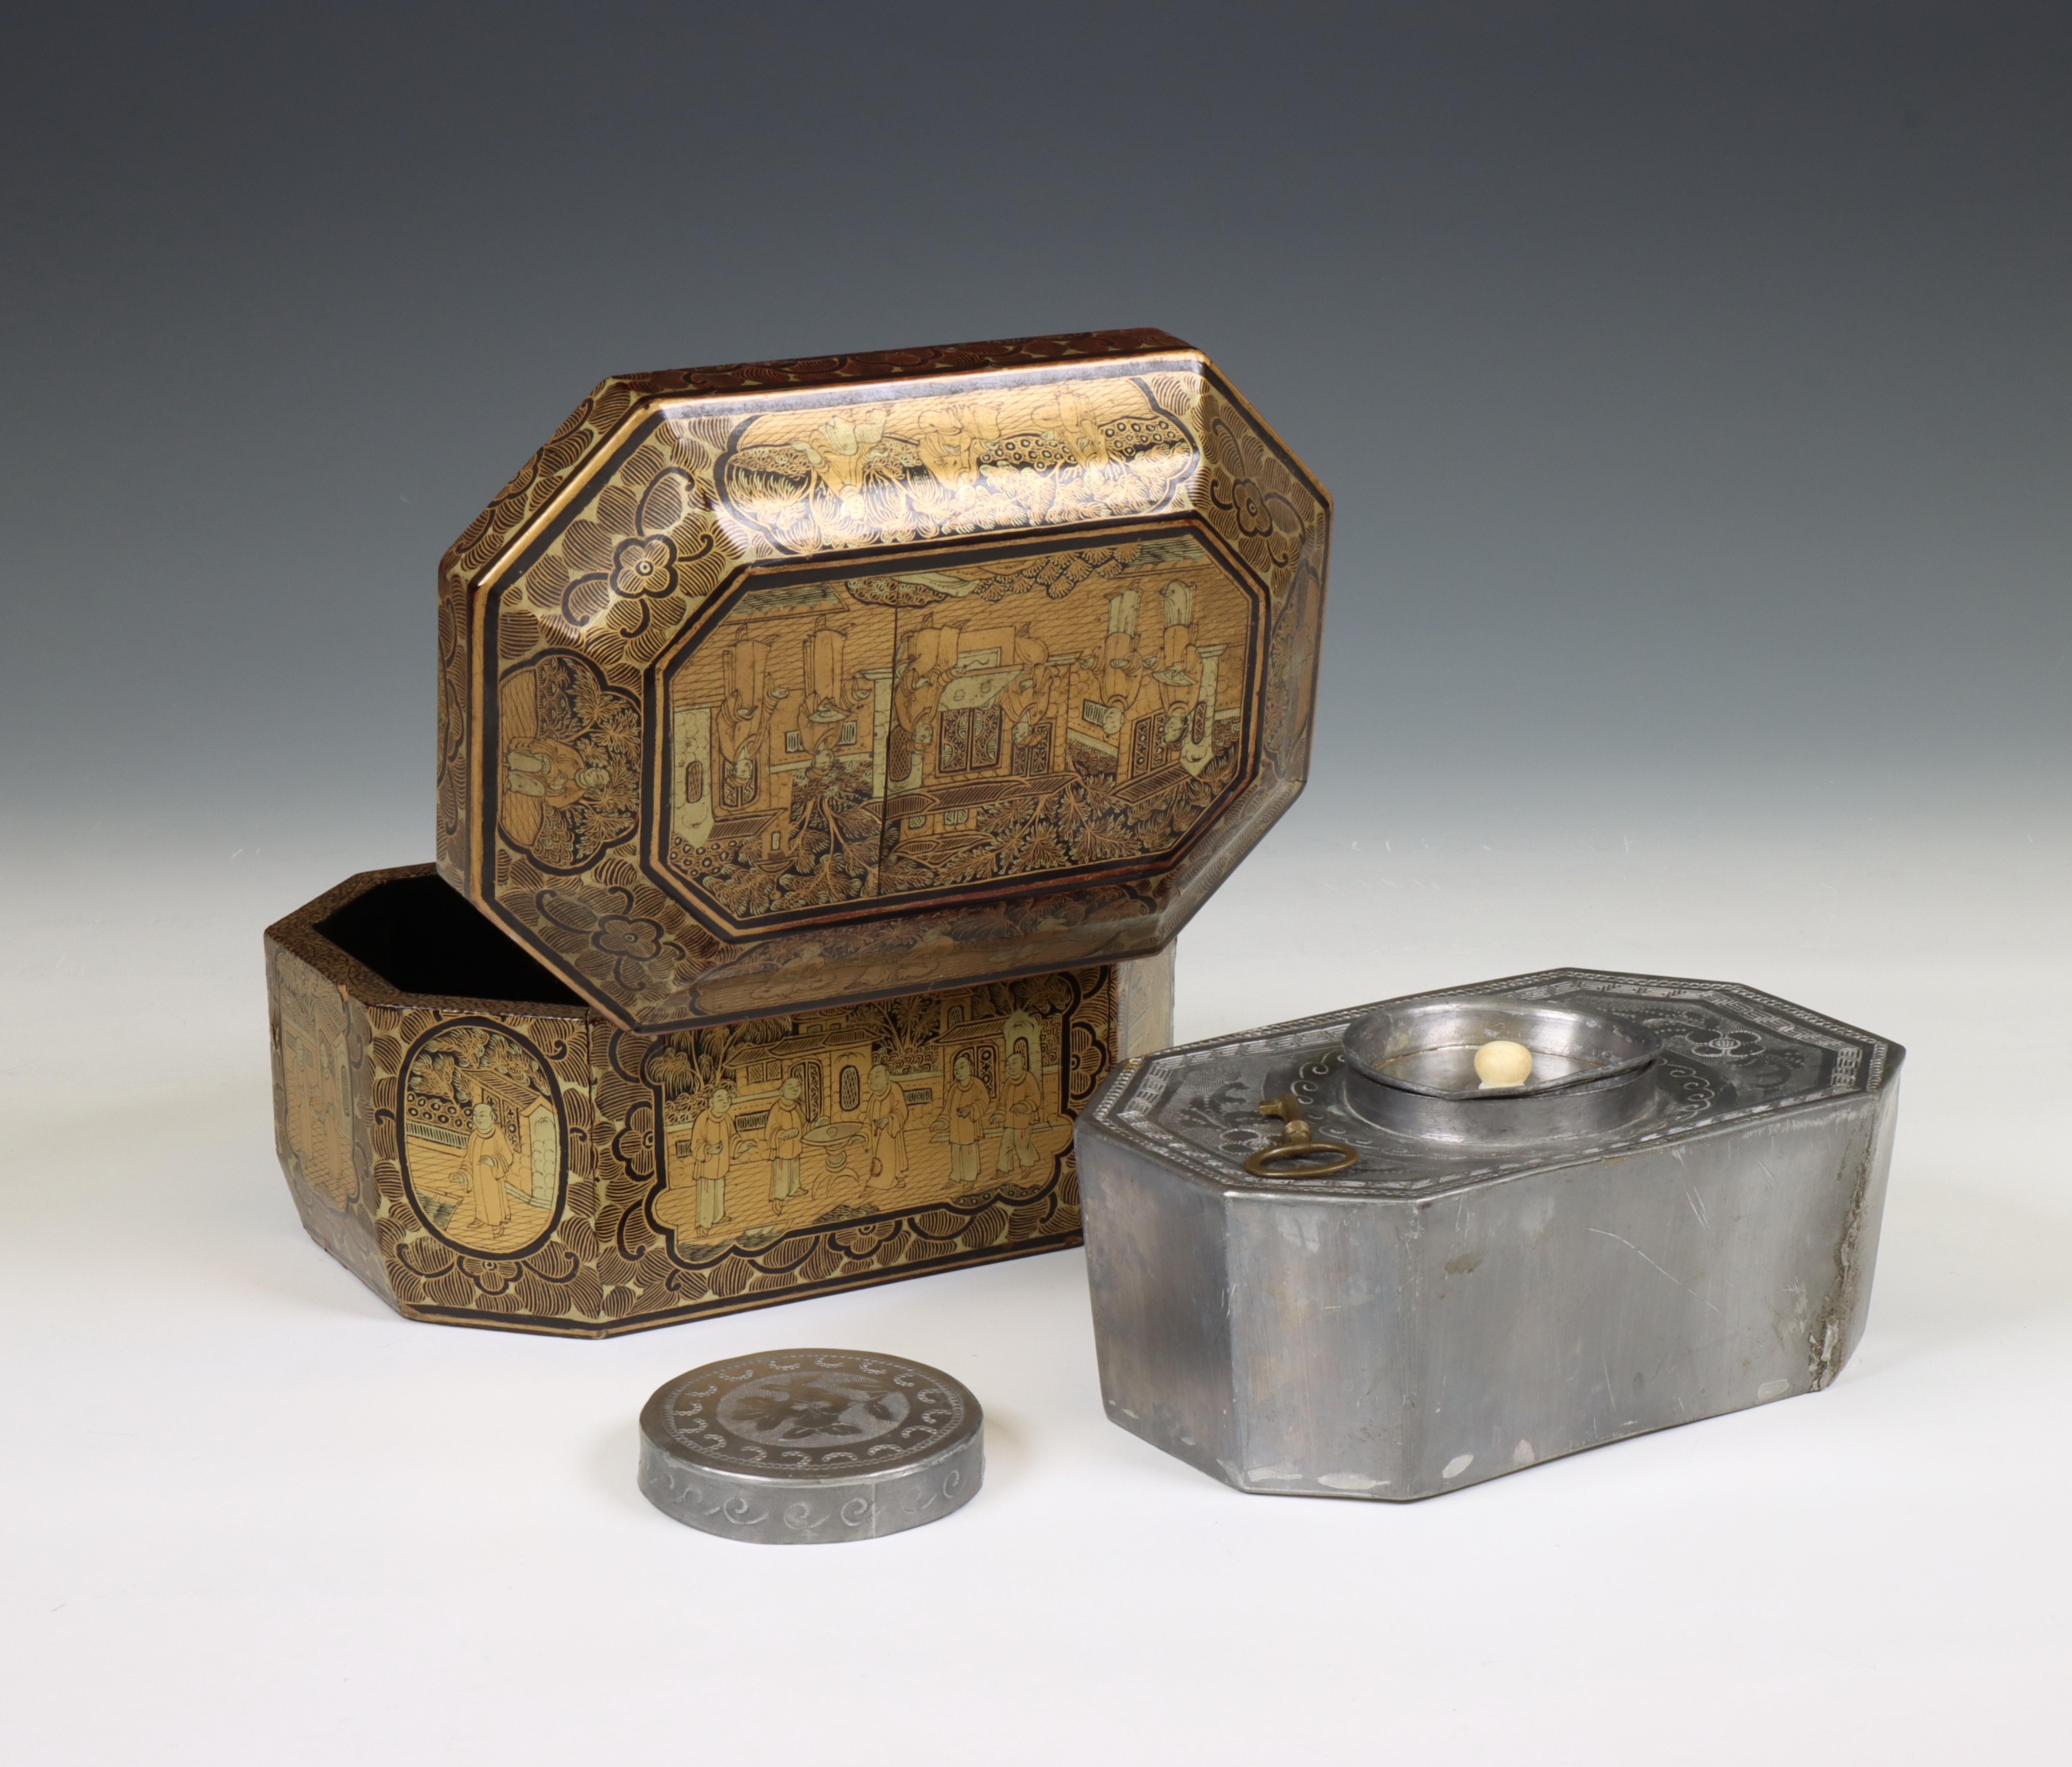 China, an export pewter tea-caddy in lacquer box, 19th century, - Image 2 of 2